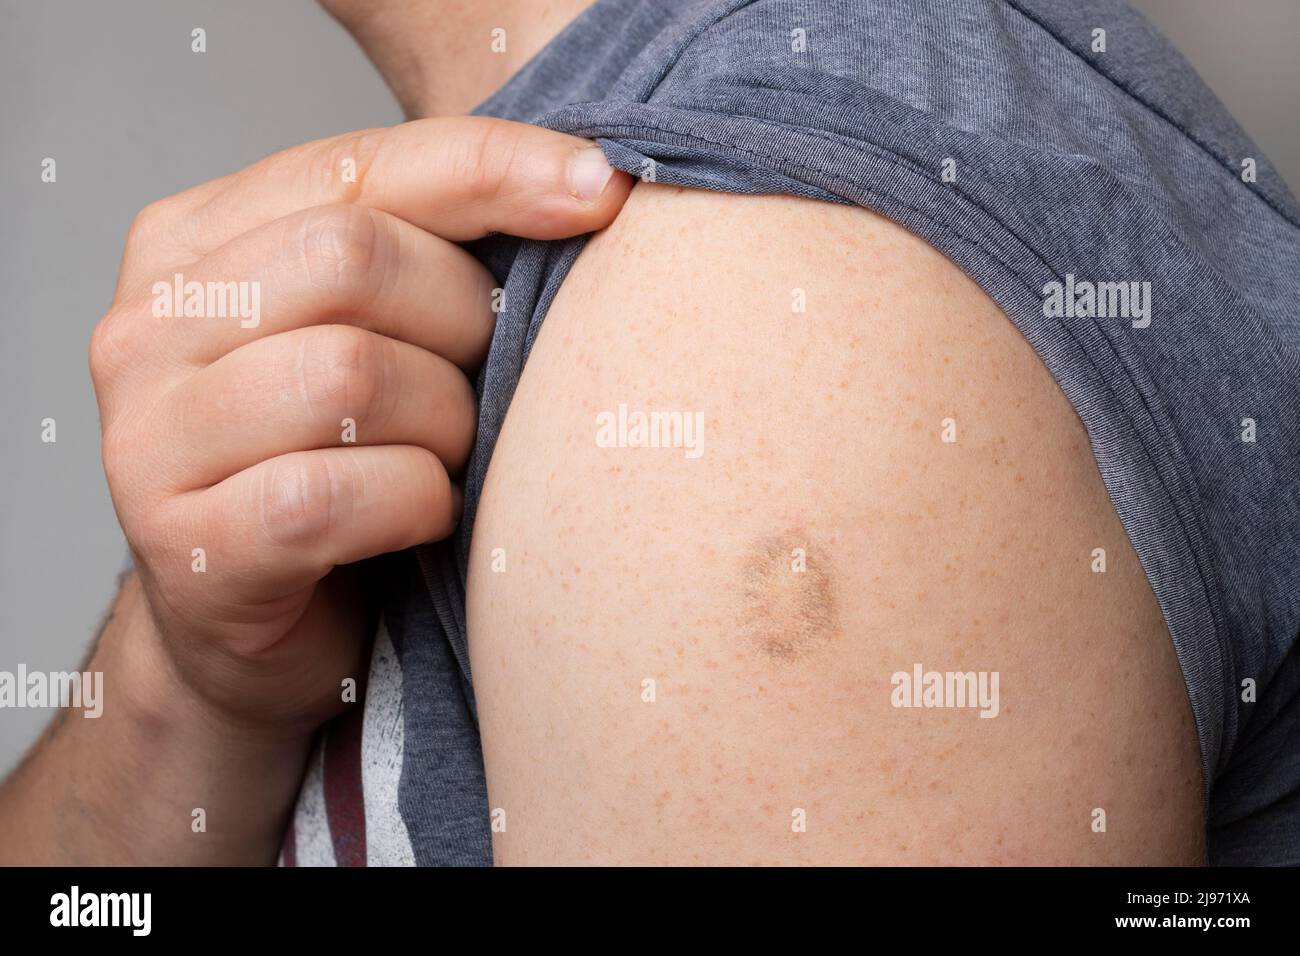 Monkeypox and smallpox vaccine scar on young man's arm Stock Photo